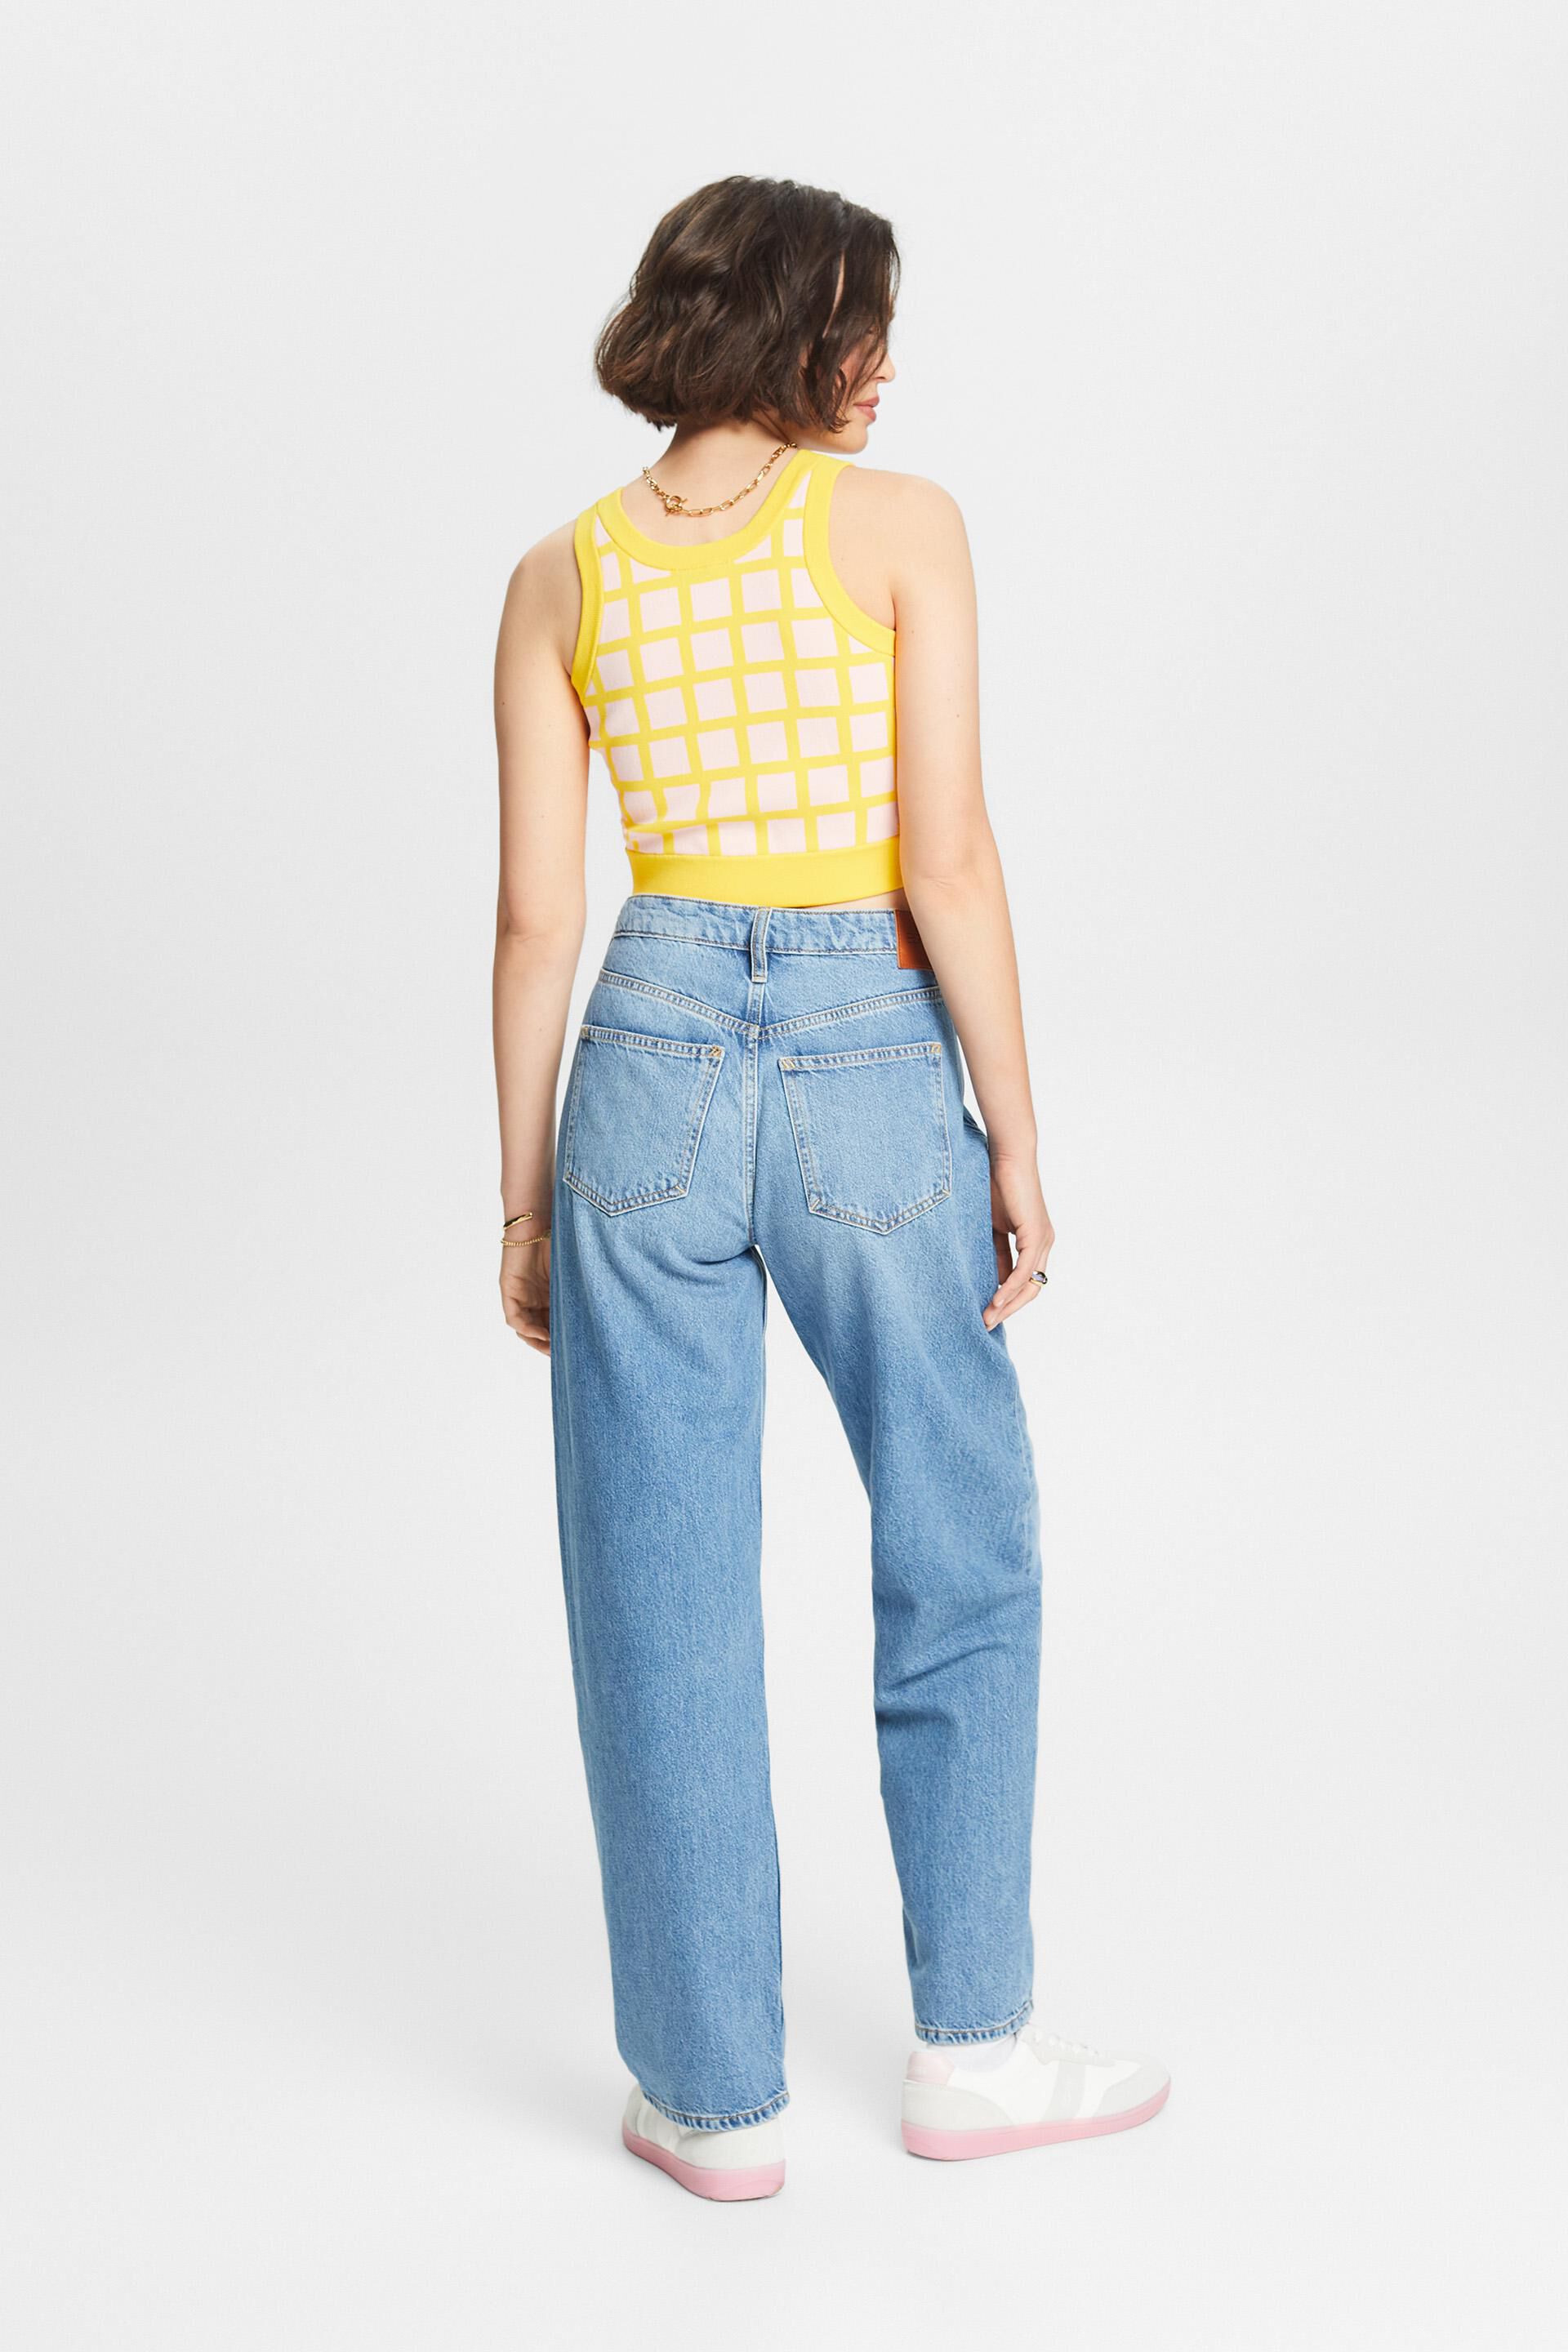 ESPRIT - Mid-rise retro flared jeans at our Online Shop